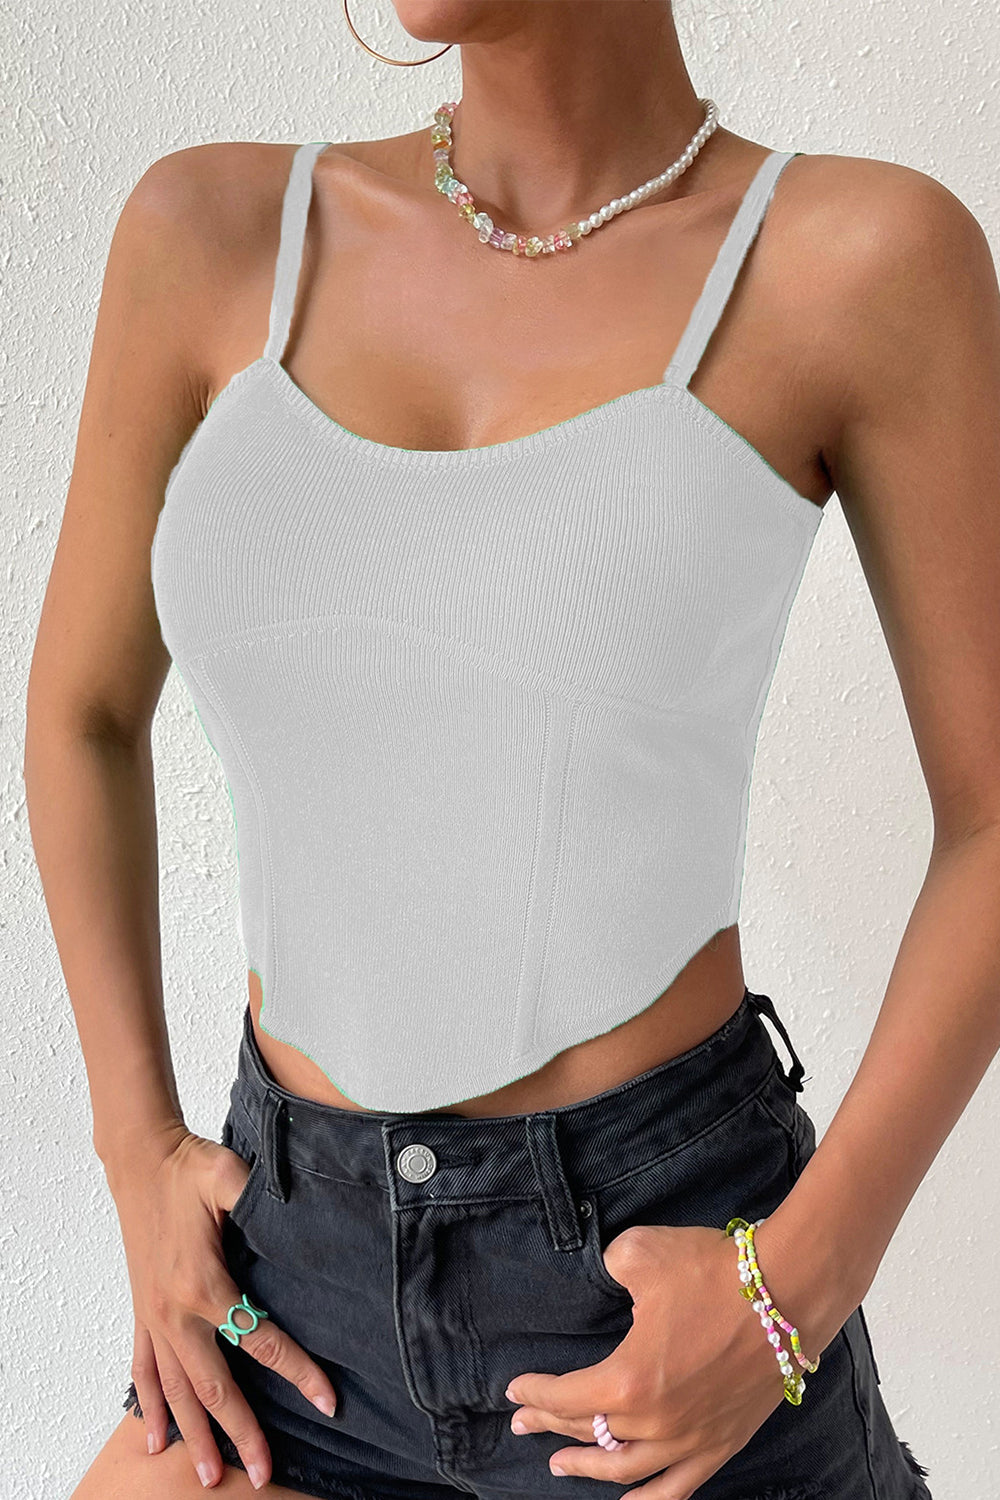 Scoop Neck Tank Top - White / S - Women’s Clothing & Accessories - Shirts & Tops - 7 - 2024